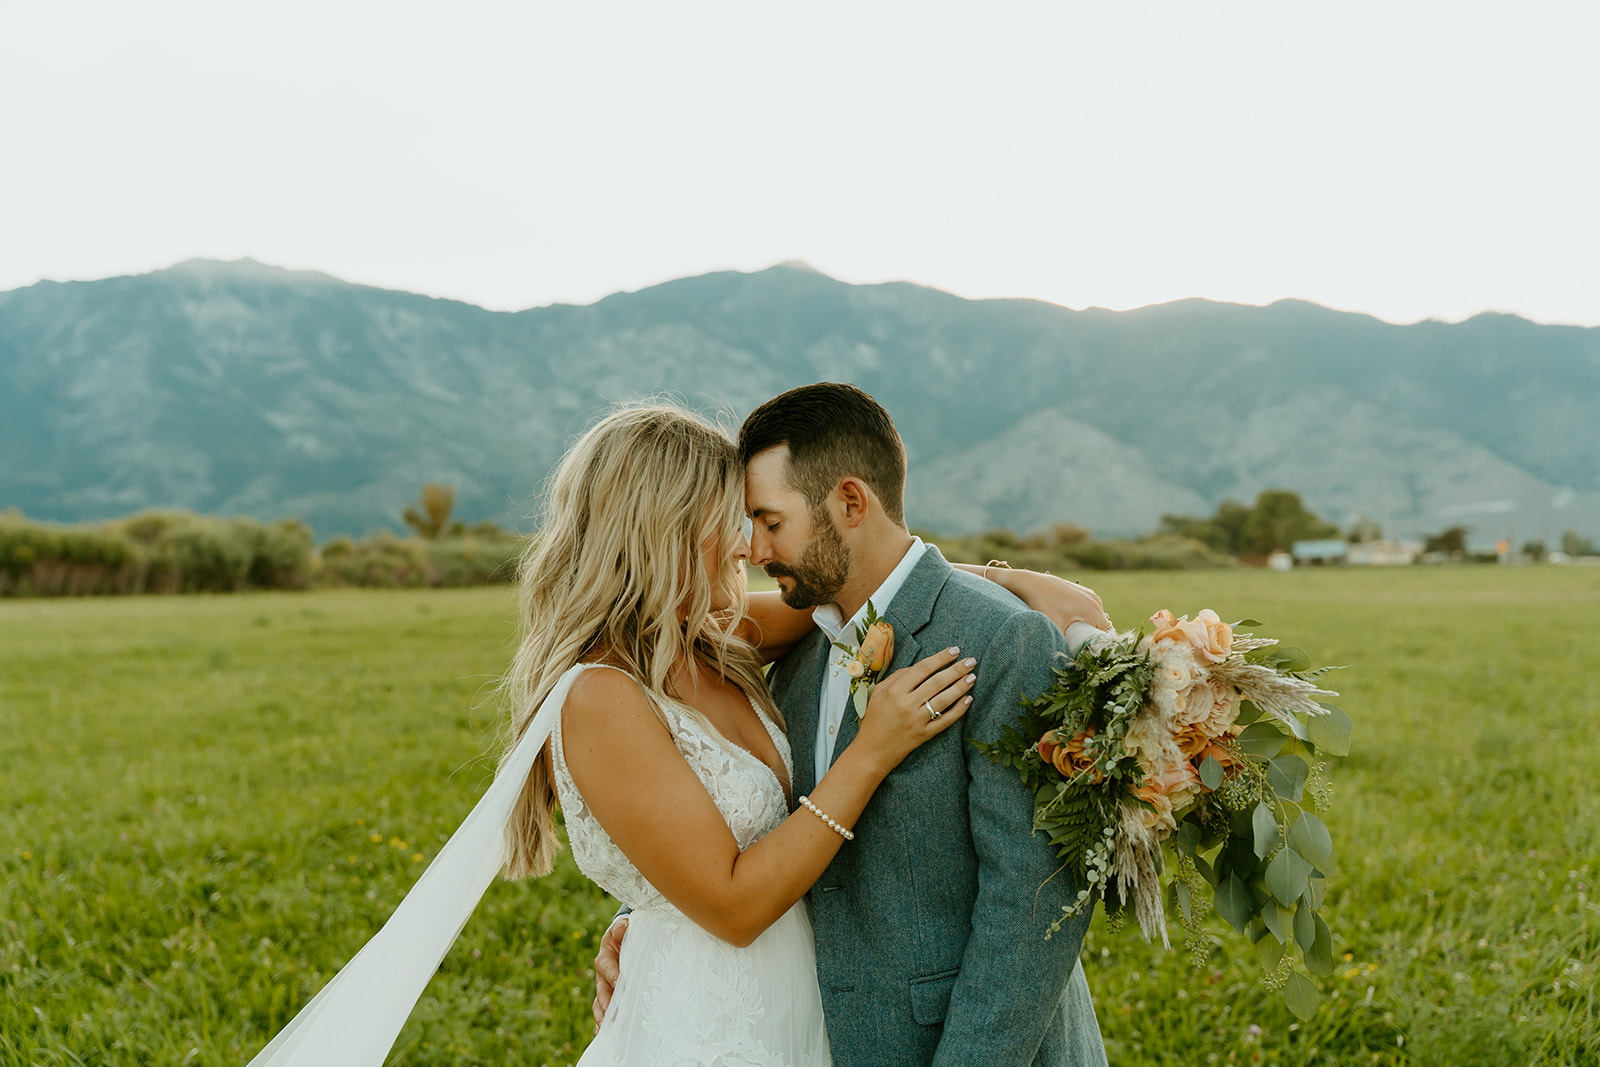 Reno wedding photographer captures bride and groom embracing and touching foreheads after western wedding